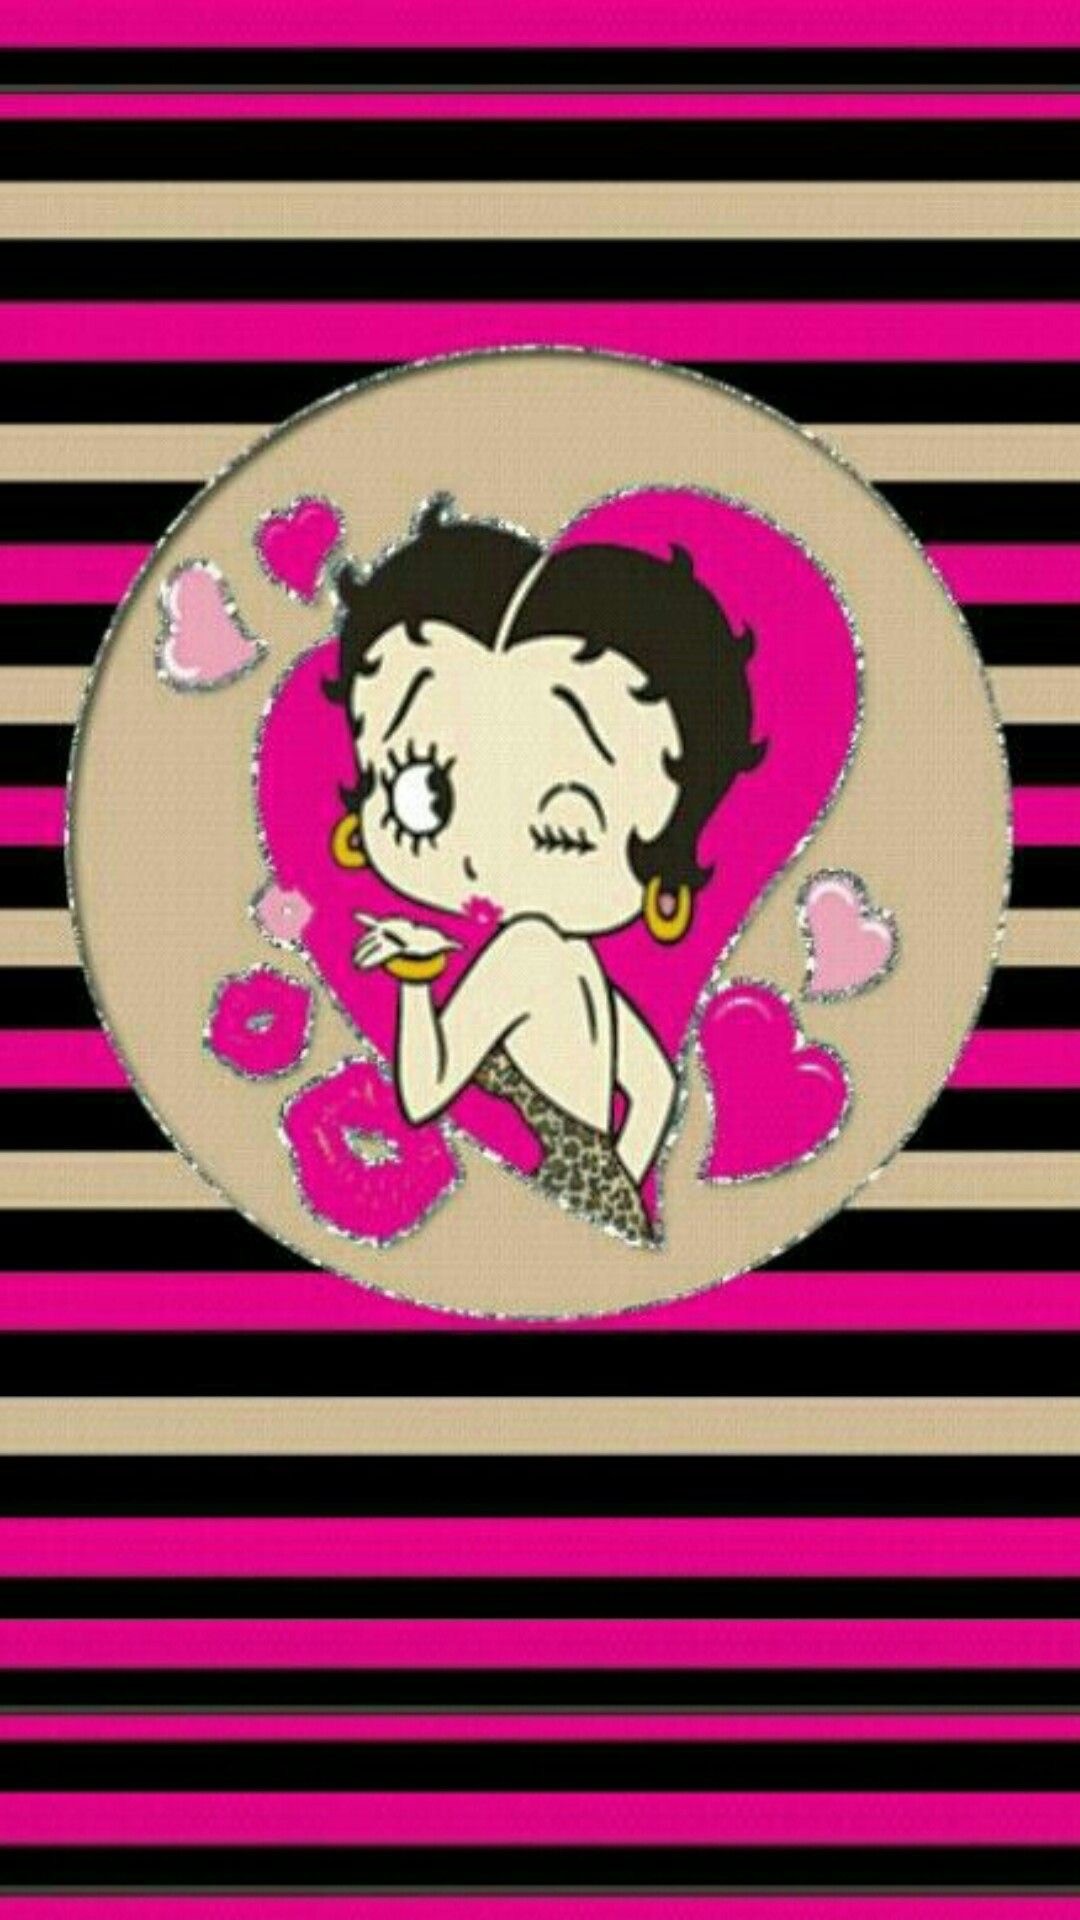 1080x1920 Bedroom Wallpaper, Phone Wallpapers, Wallpaper Backgrounds, Timeline  Covers, Betty Boop, Apple Brown Betty, Papo, Black Art, Bb